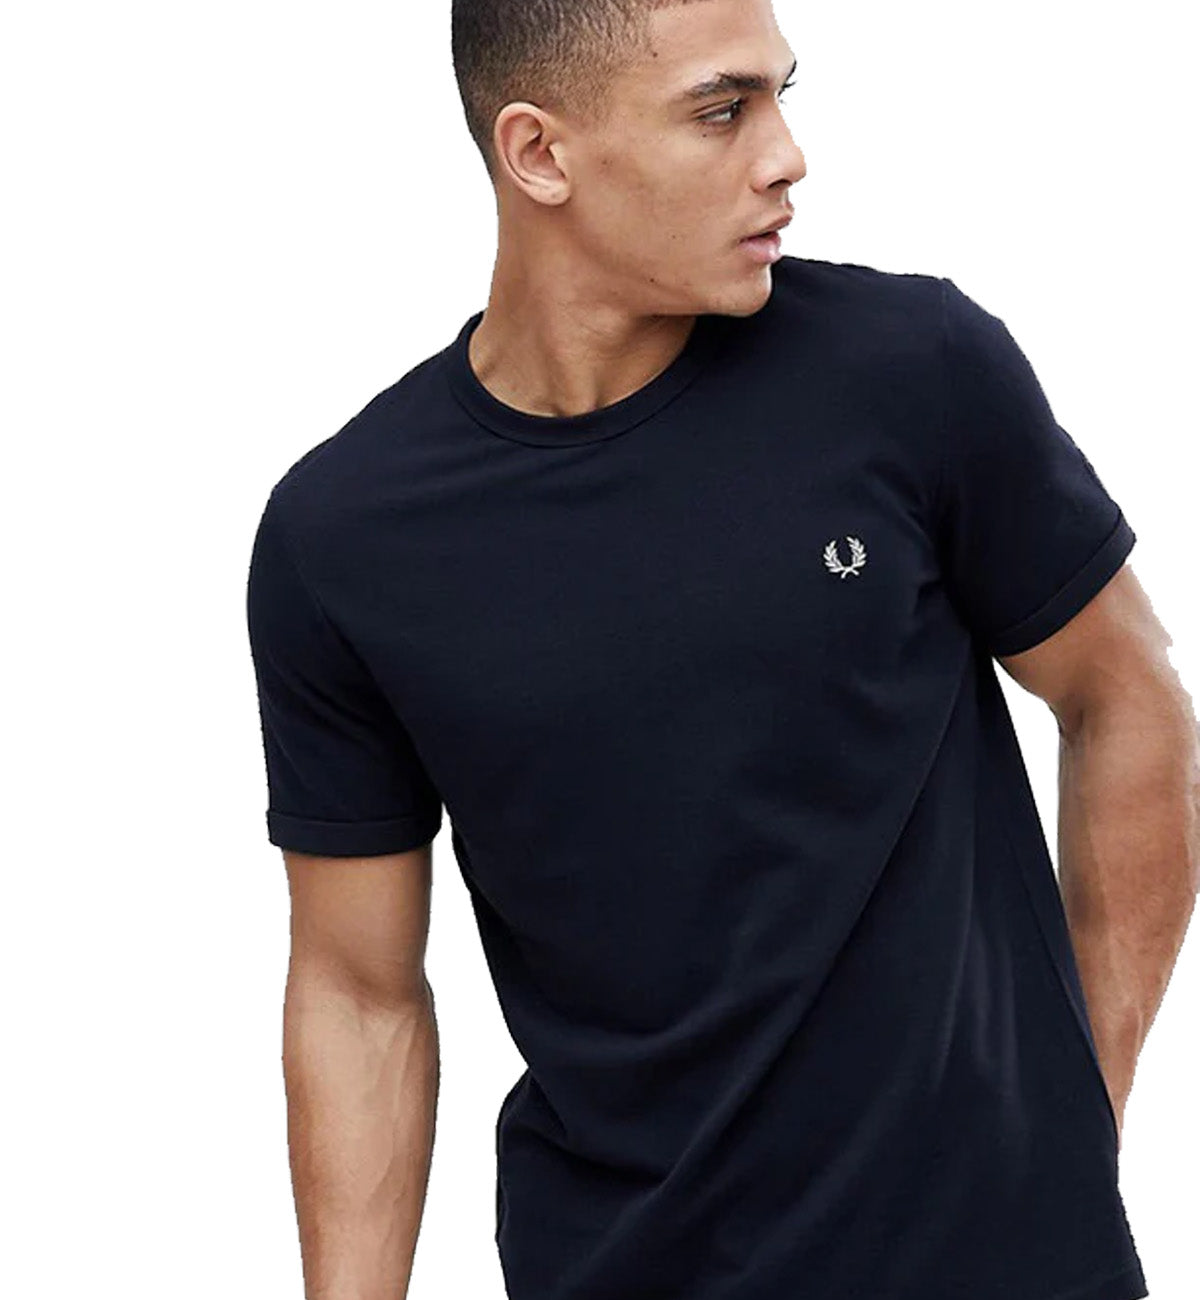 Fred Perry Black with Small Logo T-Shirt